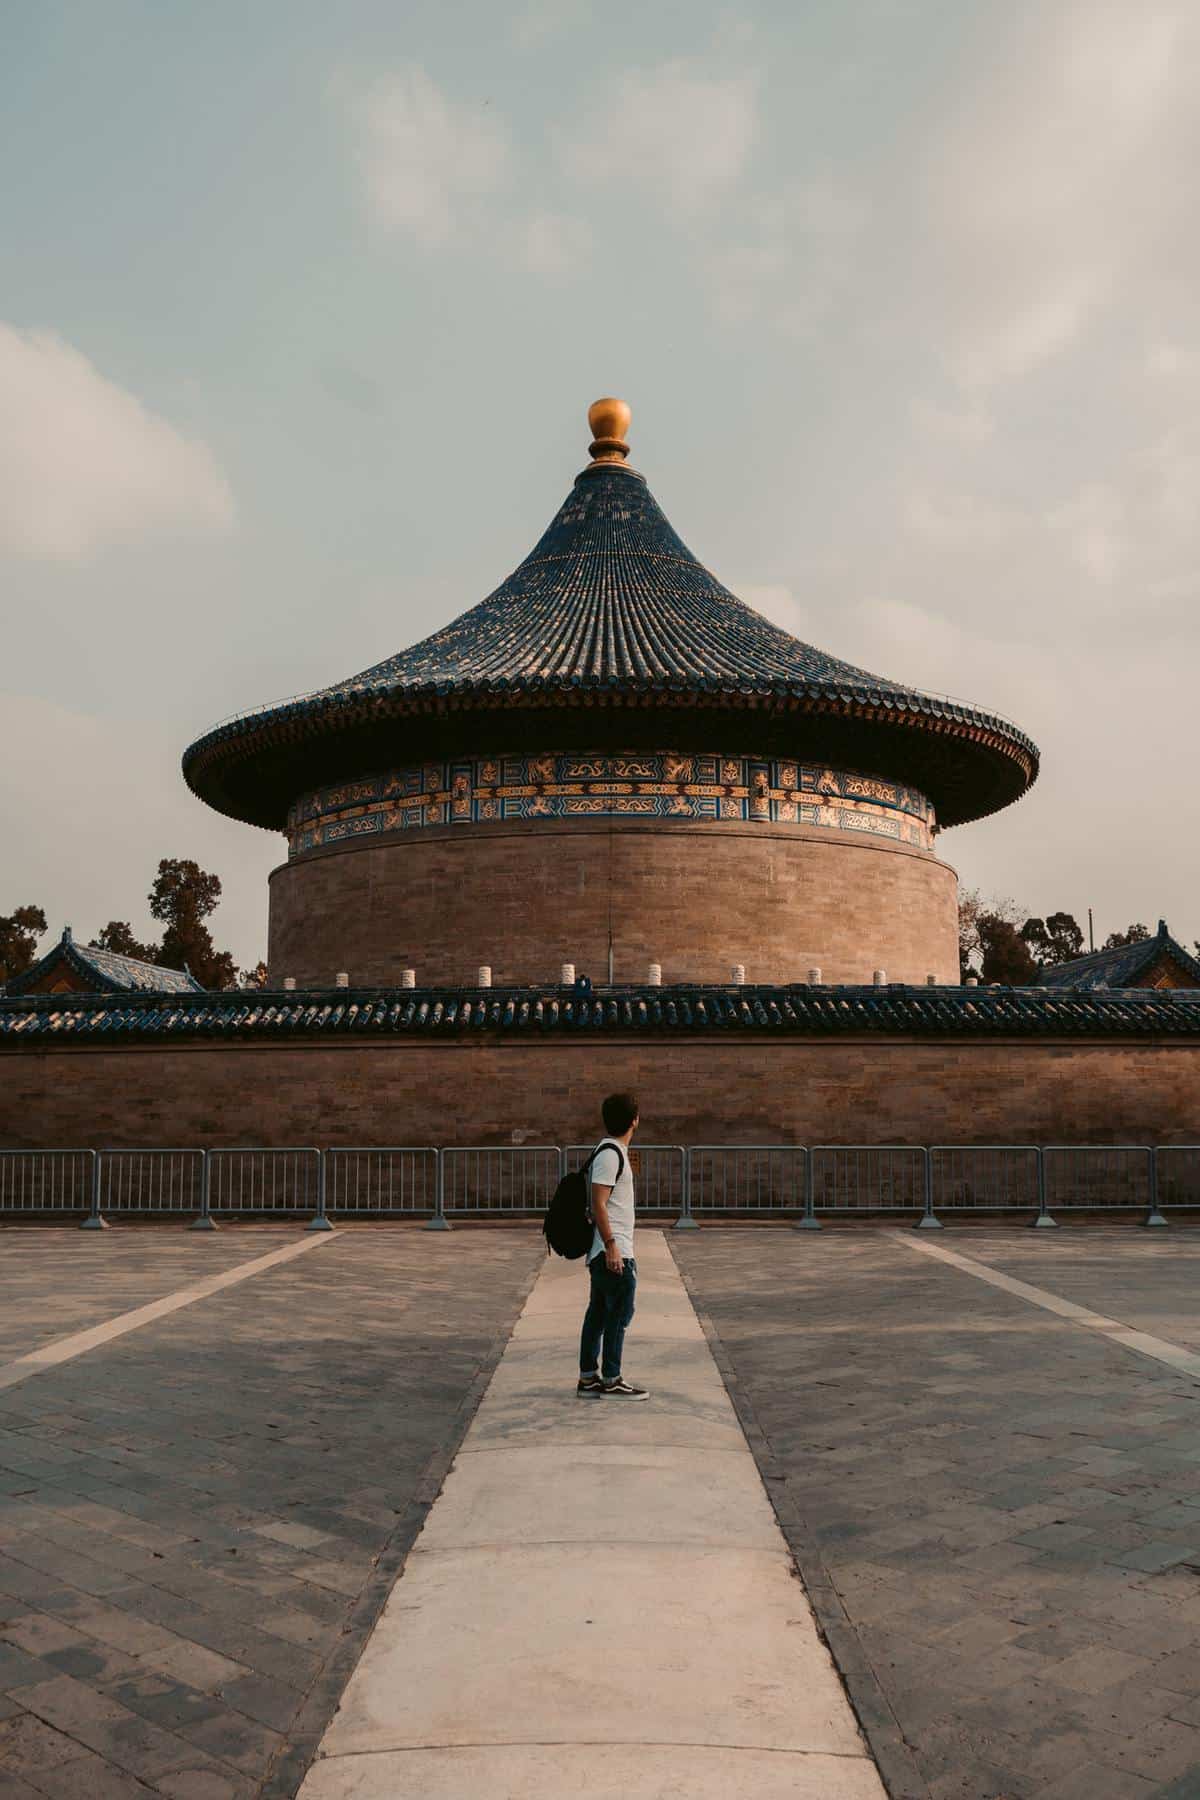 What are the benefits of studying in Beijing?